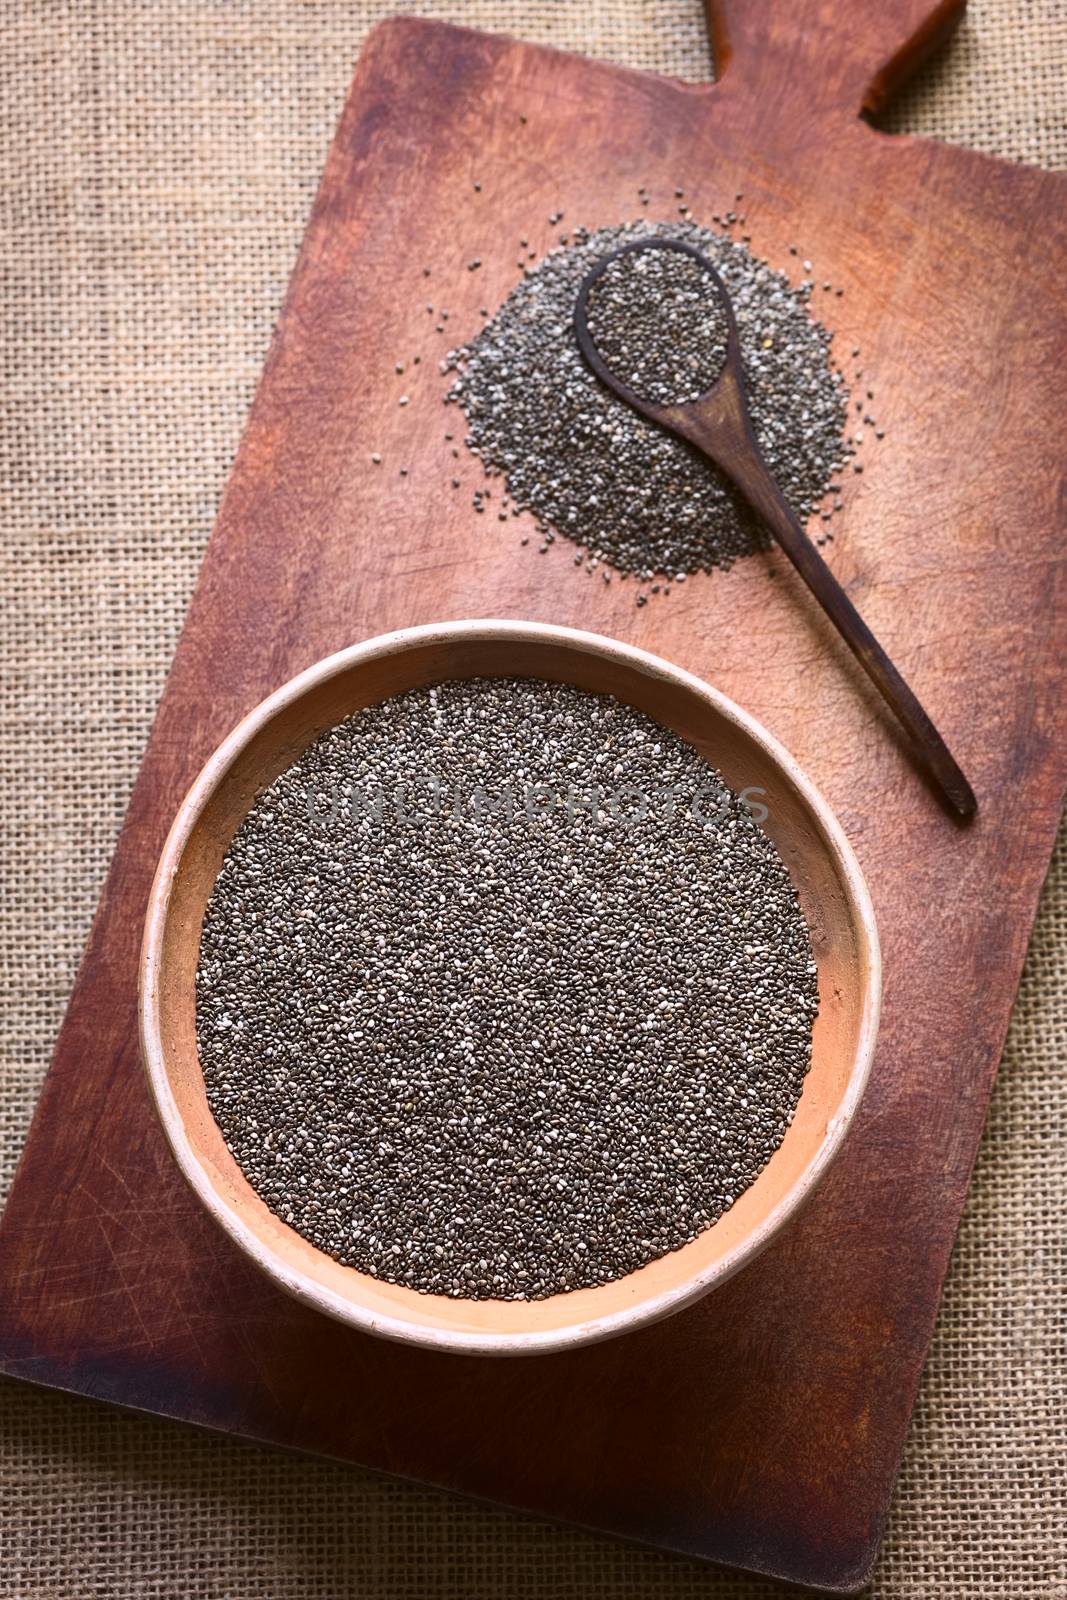 Overhead shot of chia seeds (lat. Salvia hispanica) in clay bowl photographed on wooden board with natural light. Chia seeds are considered a superfood containing proteins, omega fats, minerals and antioxidants (Selective Focus, Focus on the seeds in the bowl)